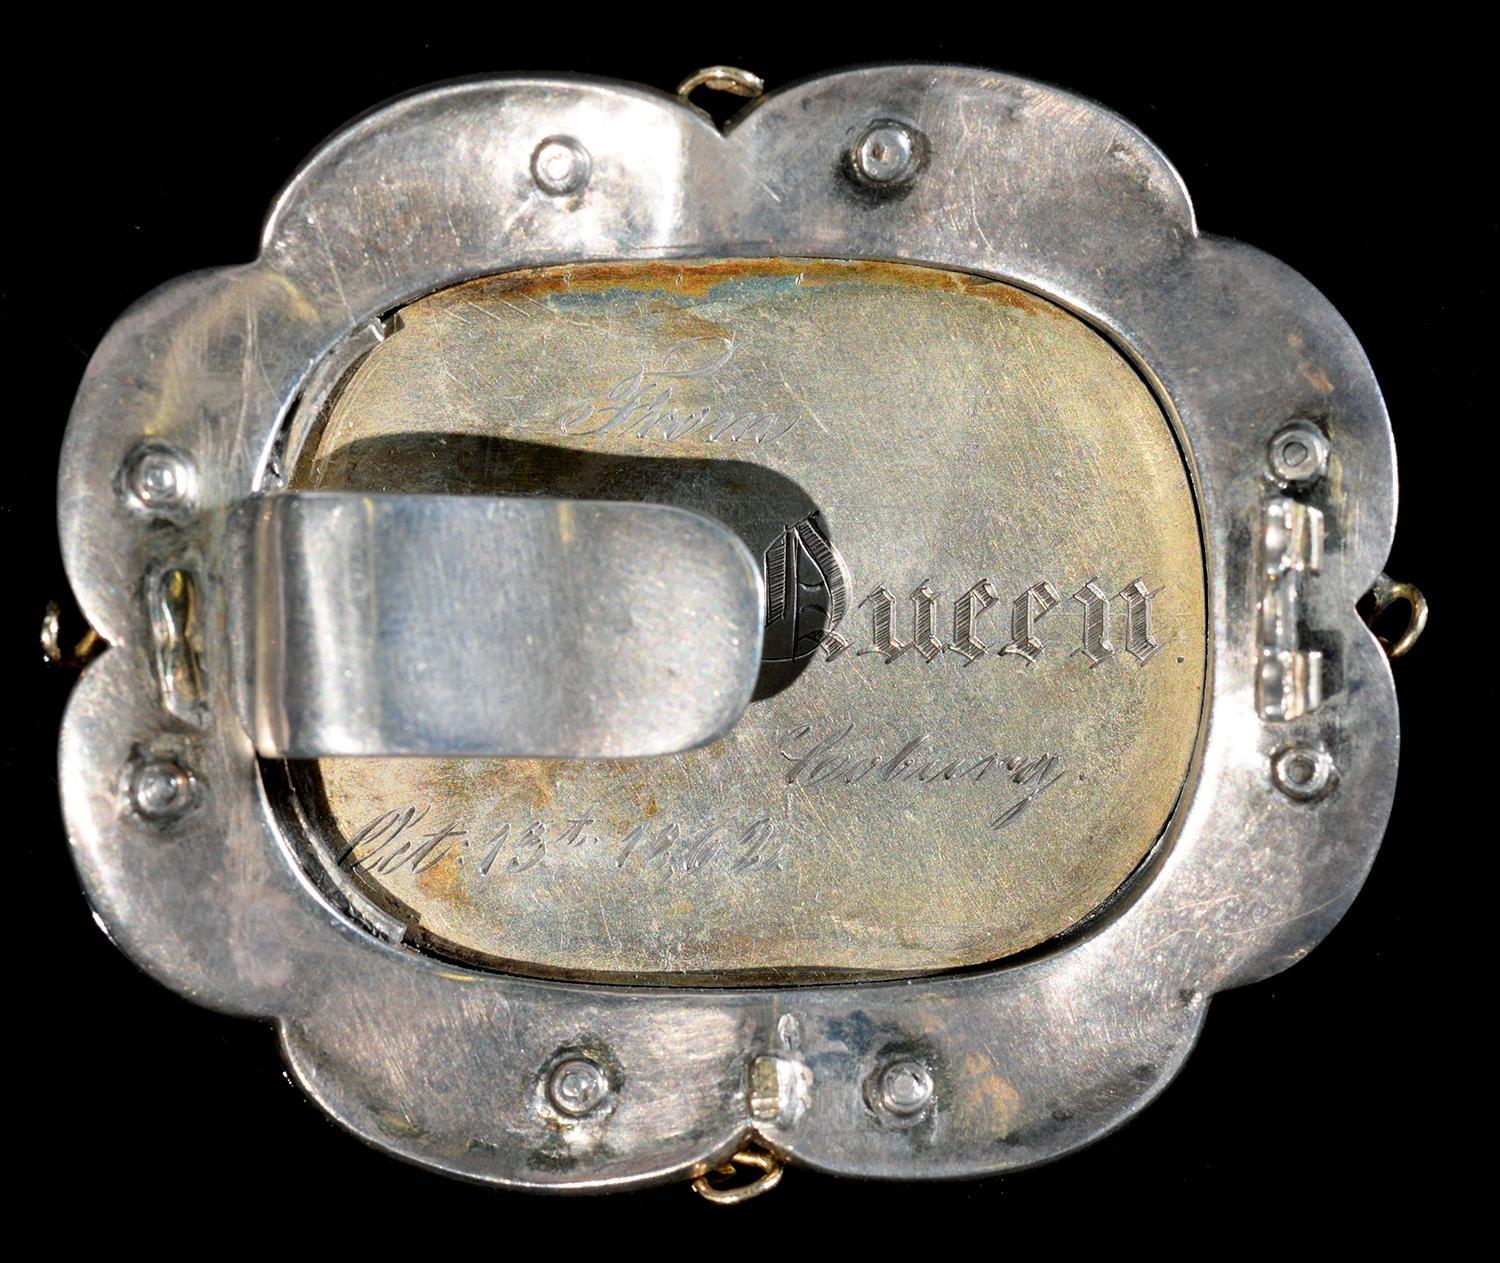 ROYAL.  A PARCEL GILT SILVER BROOCH with cast oblong engraved bas relief view of a schloss, possibly - Image 2 of 2